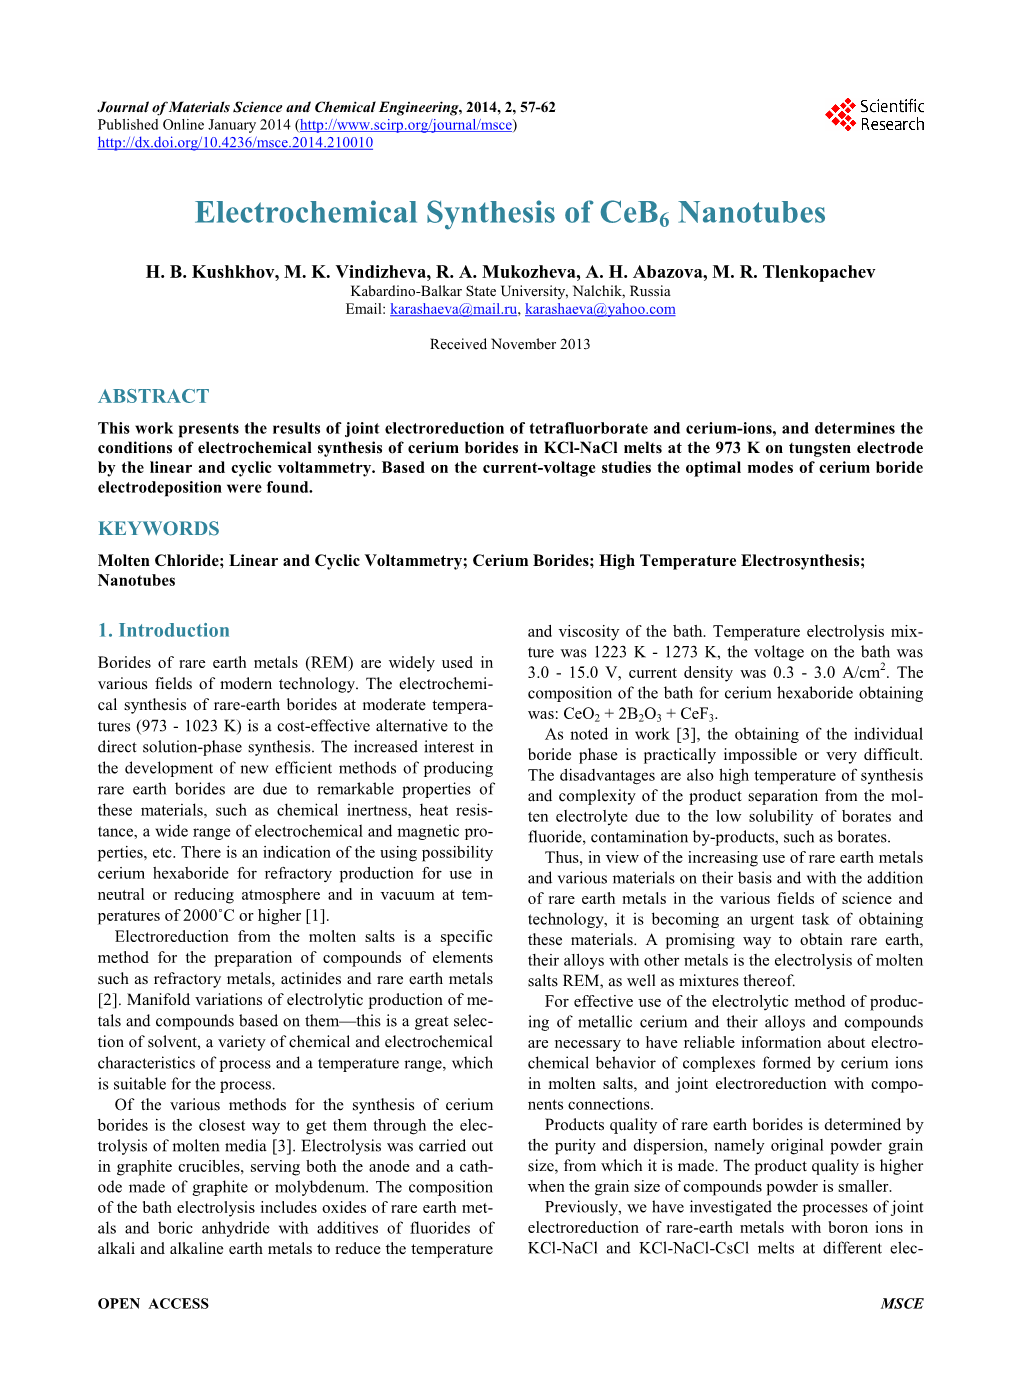 Electrochemical Synthesis of Ceb6 Nanotubes